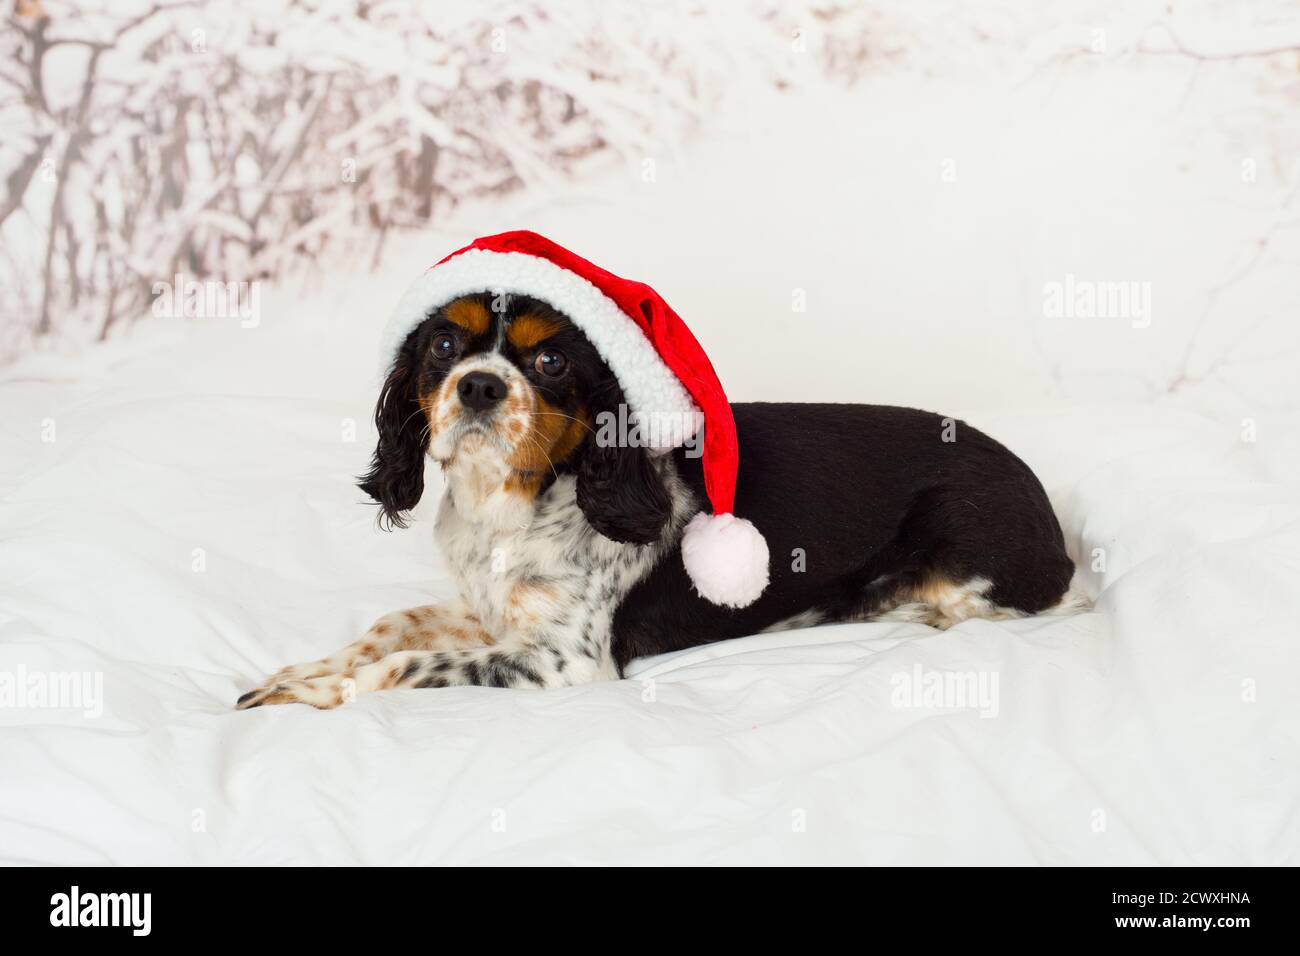 Cute Cavalier King Charles spaniel dog, black, white and tan, lying down in red and white Santa hat,  in winter snow scene Stock Photo